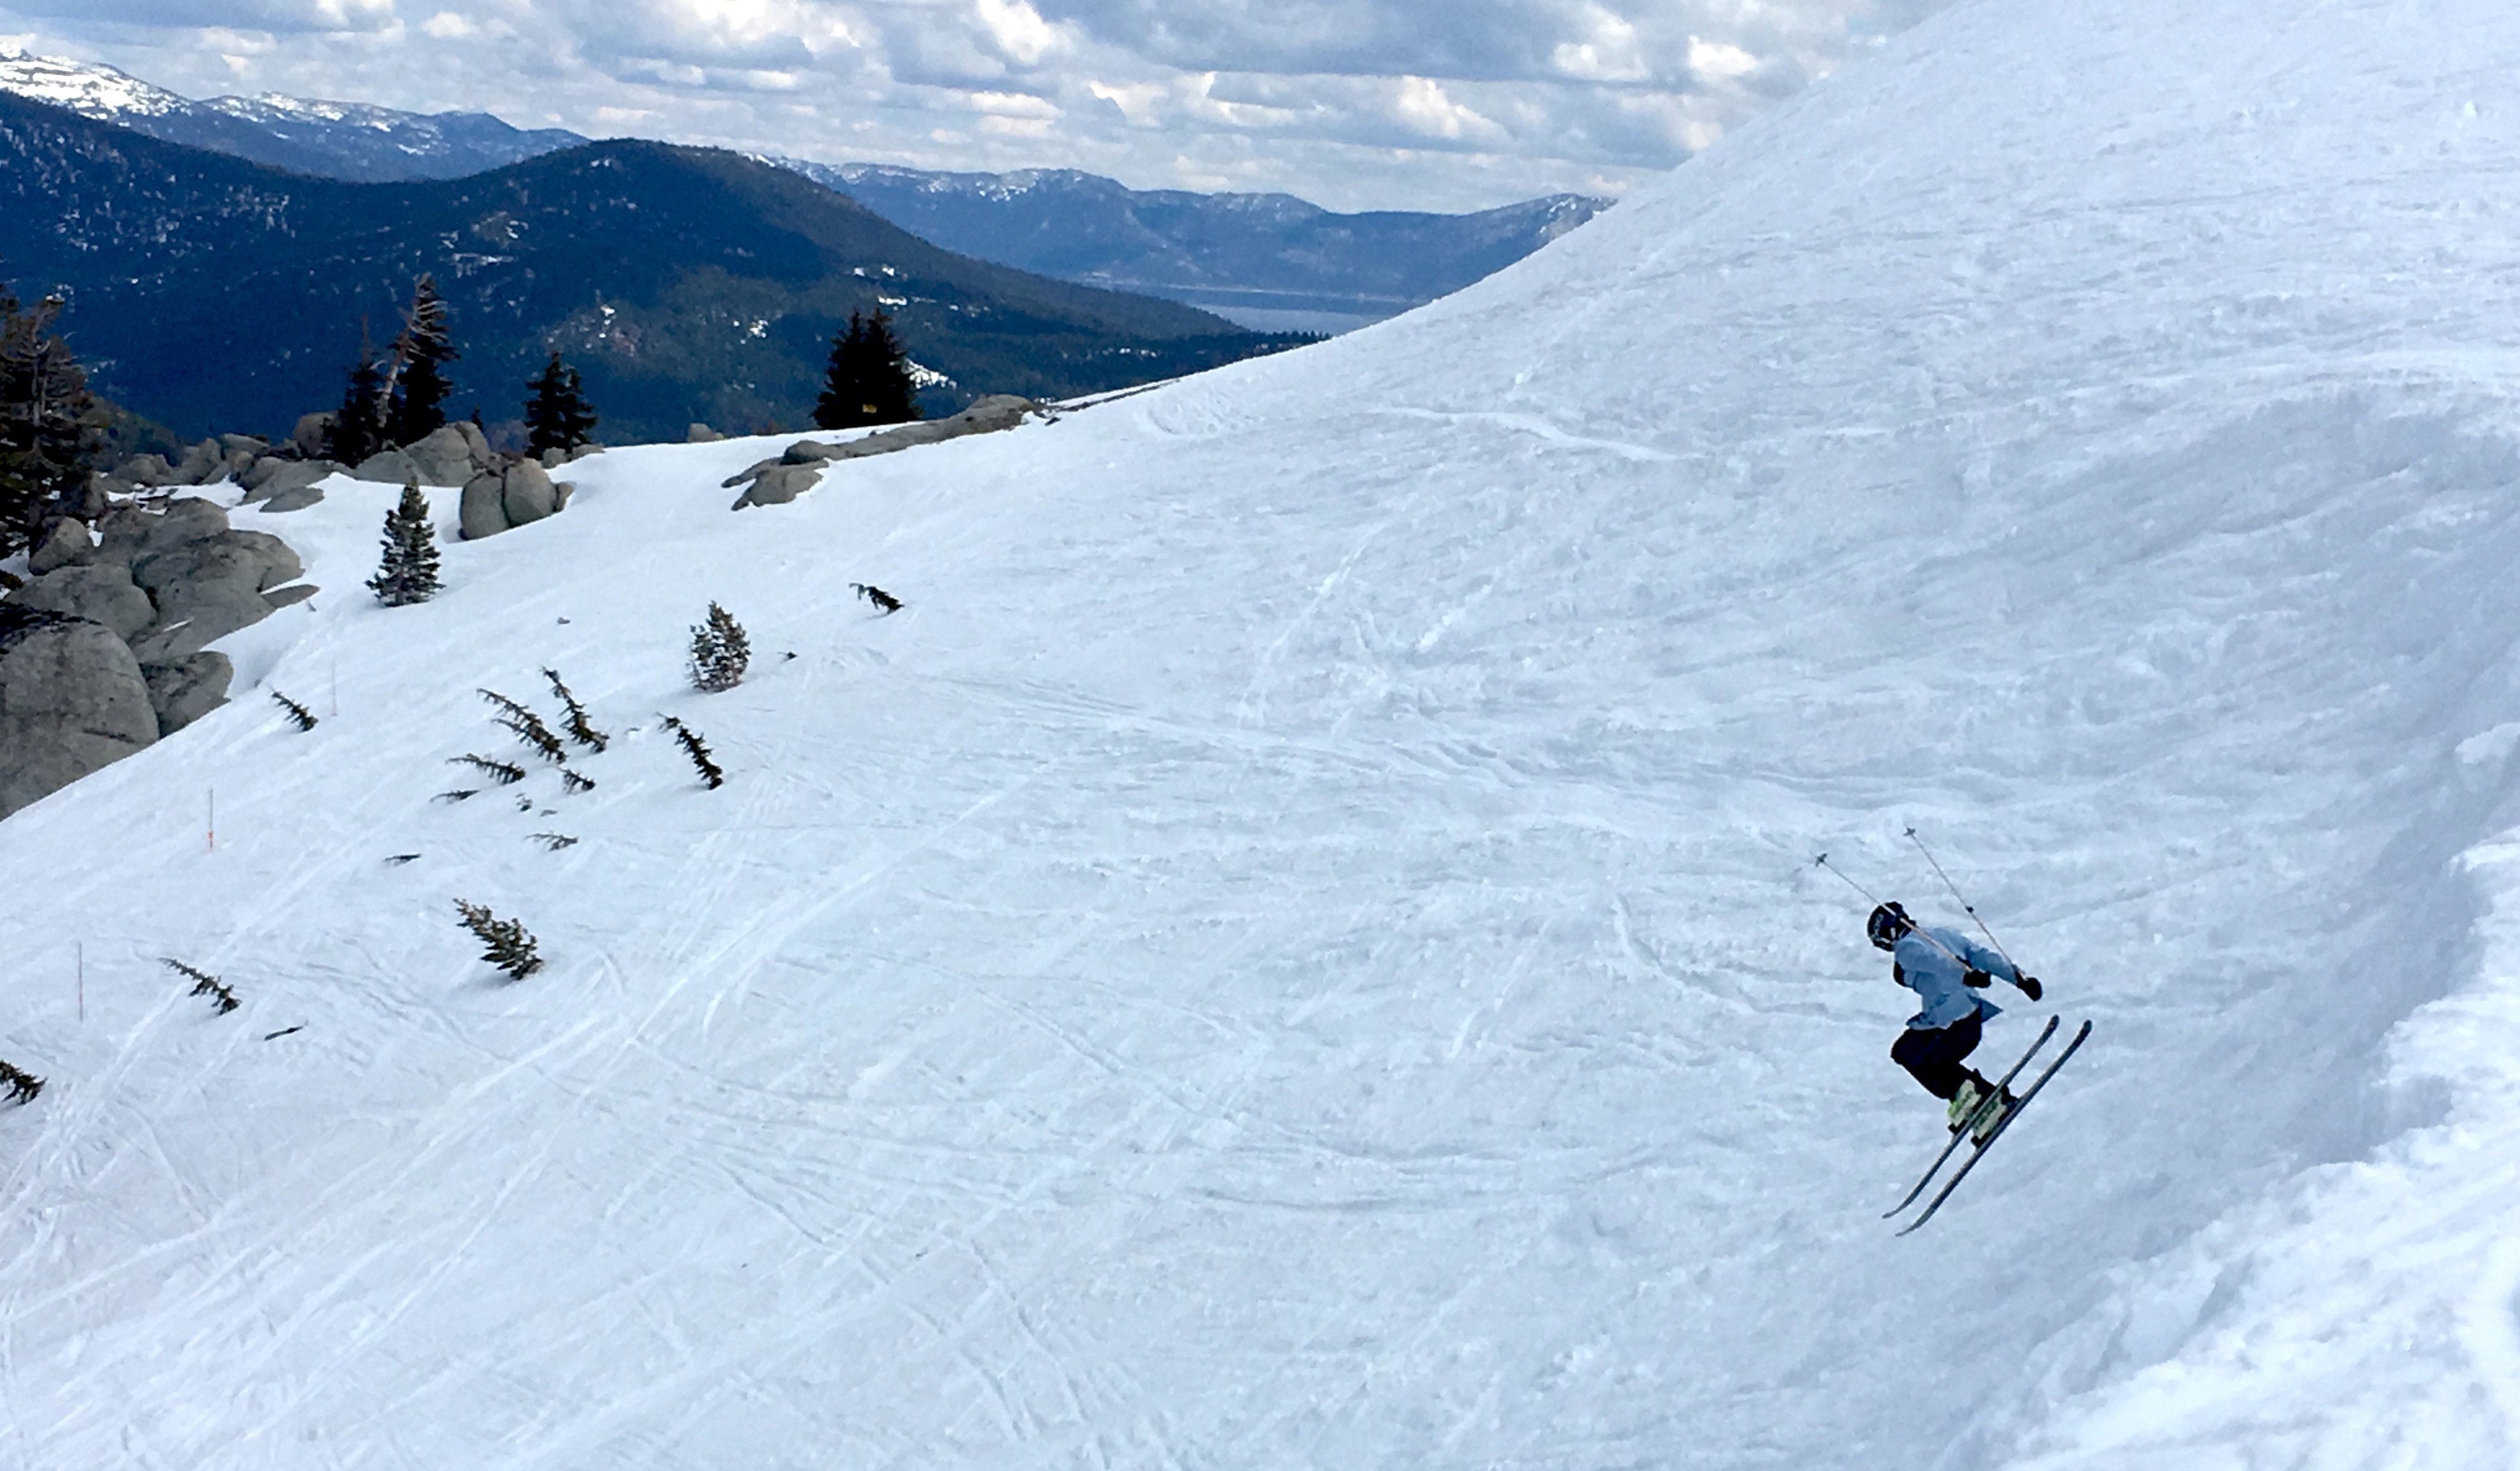 Carl launching the cornice off Granite today. photo: yimmers/snowbrains